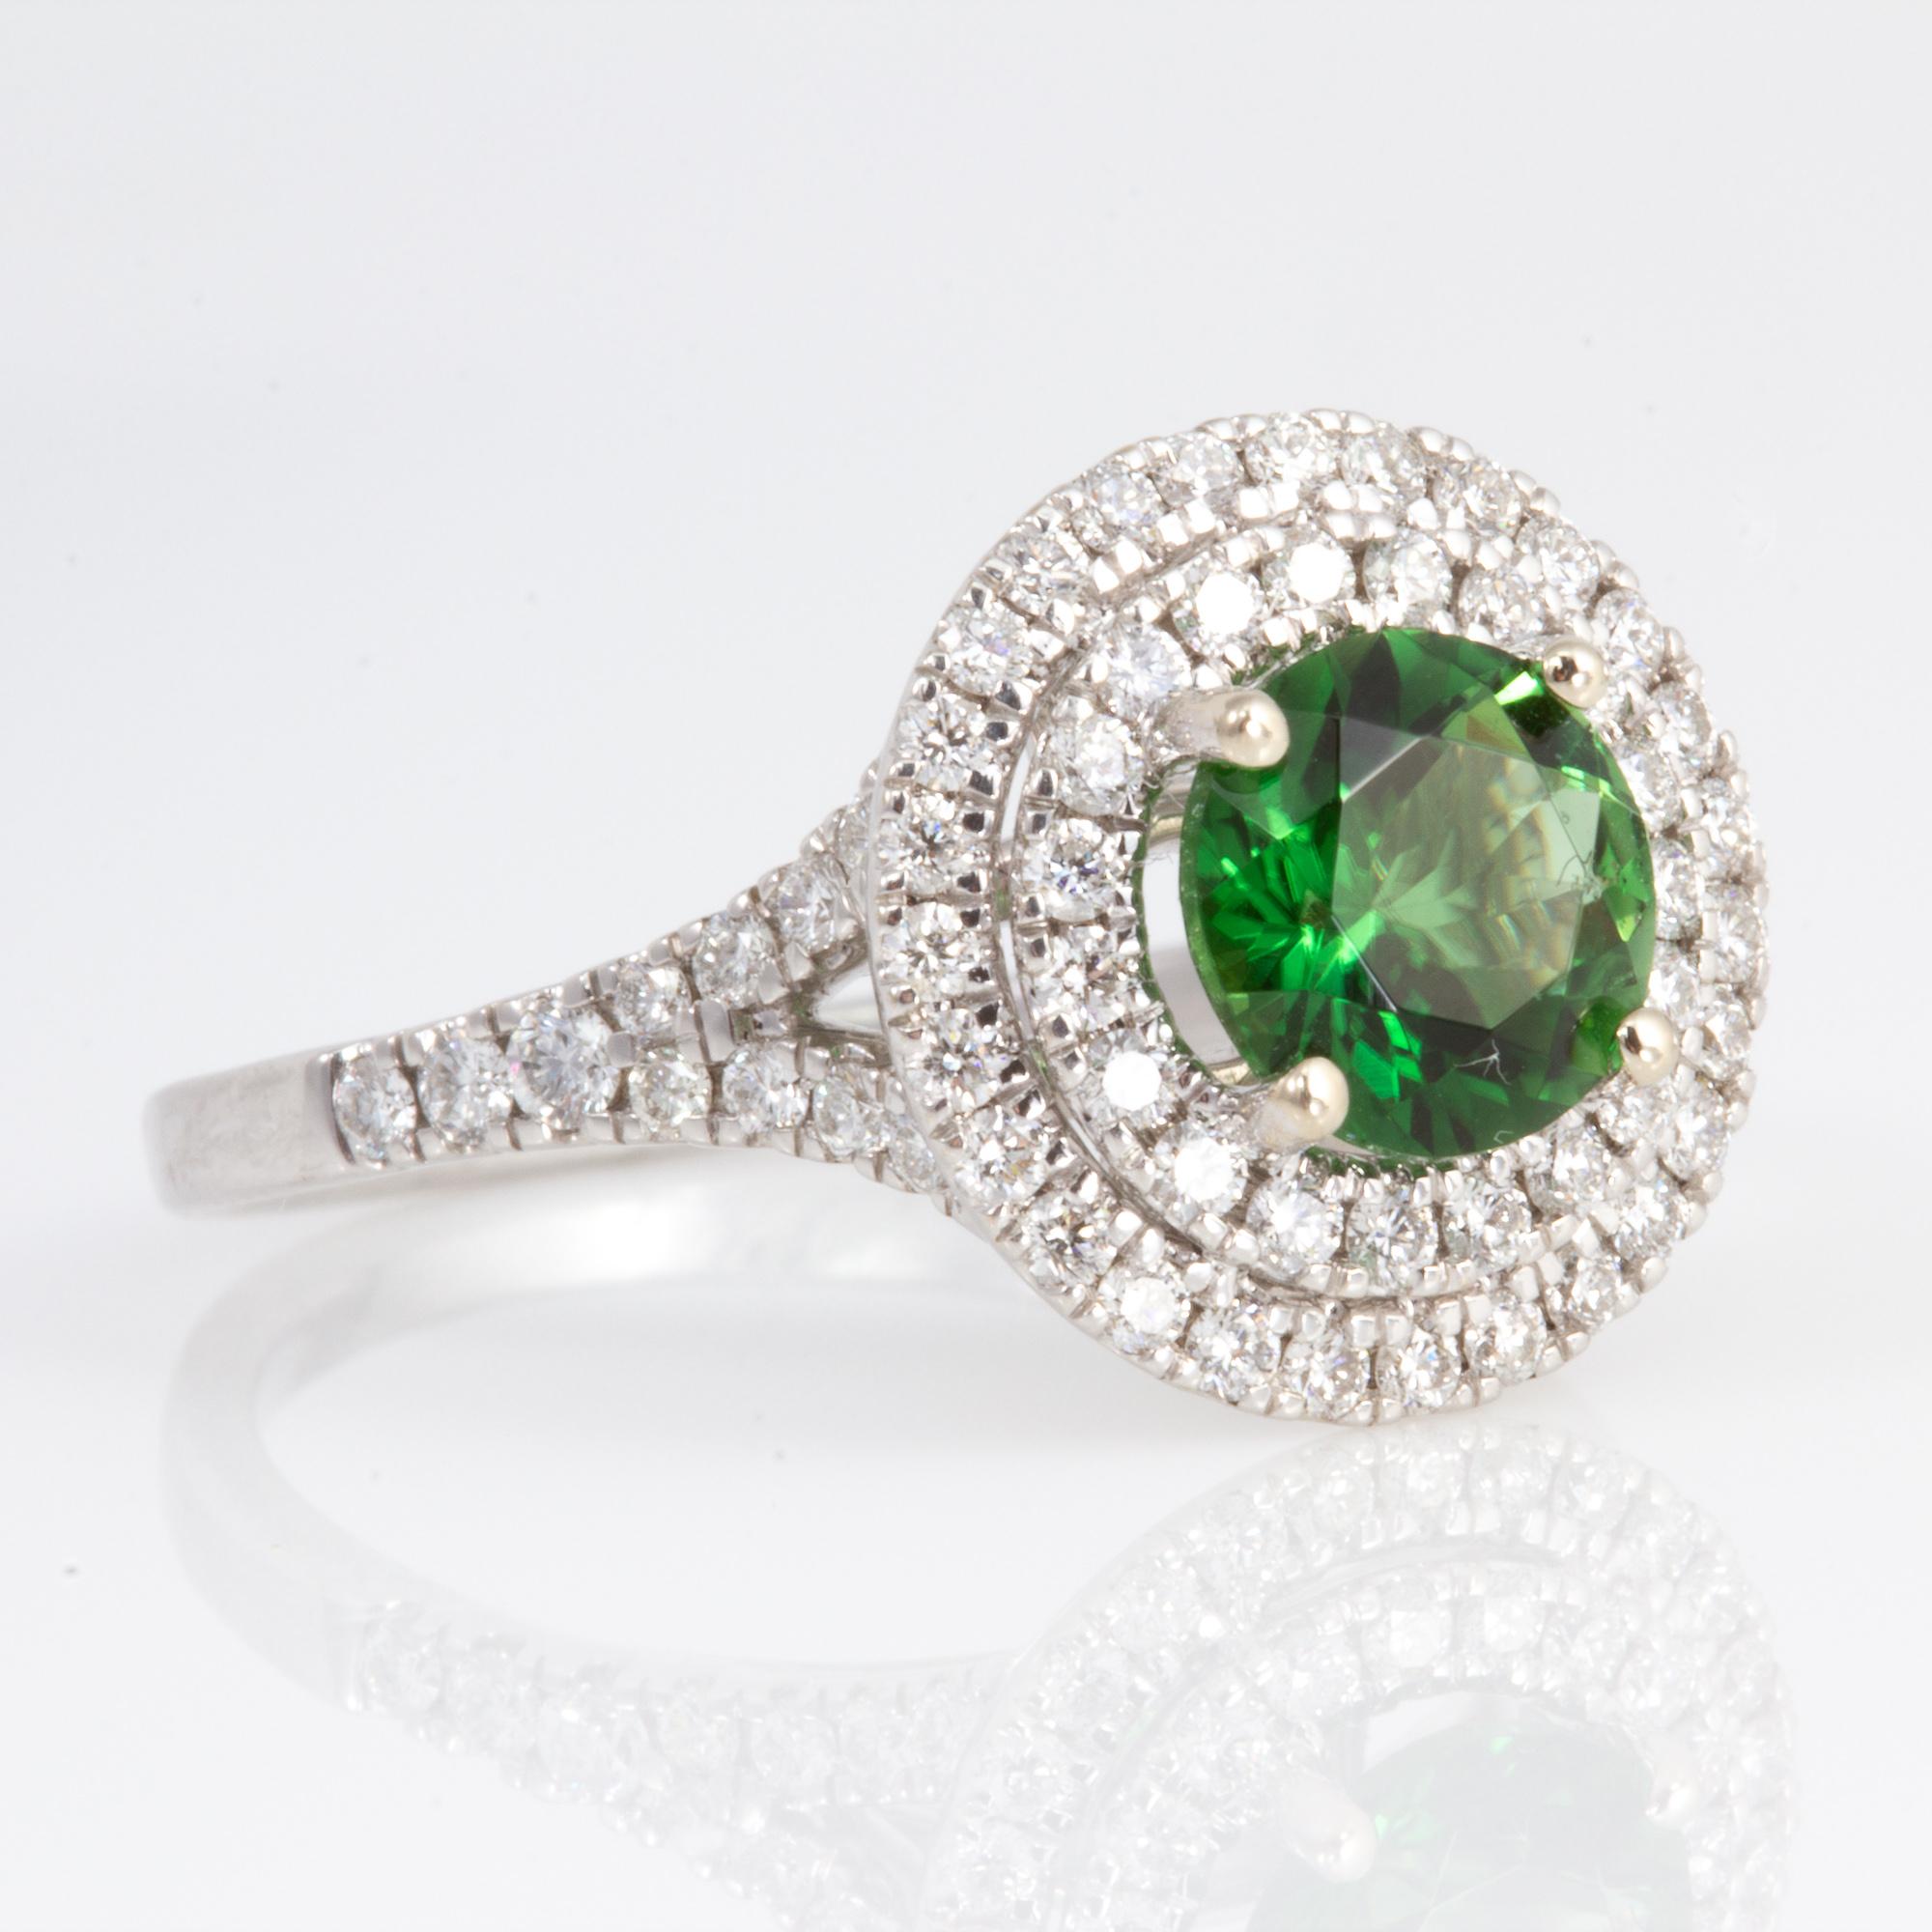 Exceptionally Well Cut 1.26 Carat Chrome Tourmaline and Diamond Ring 8